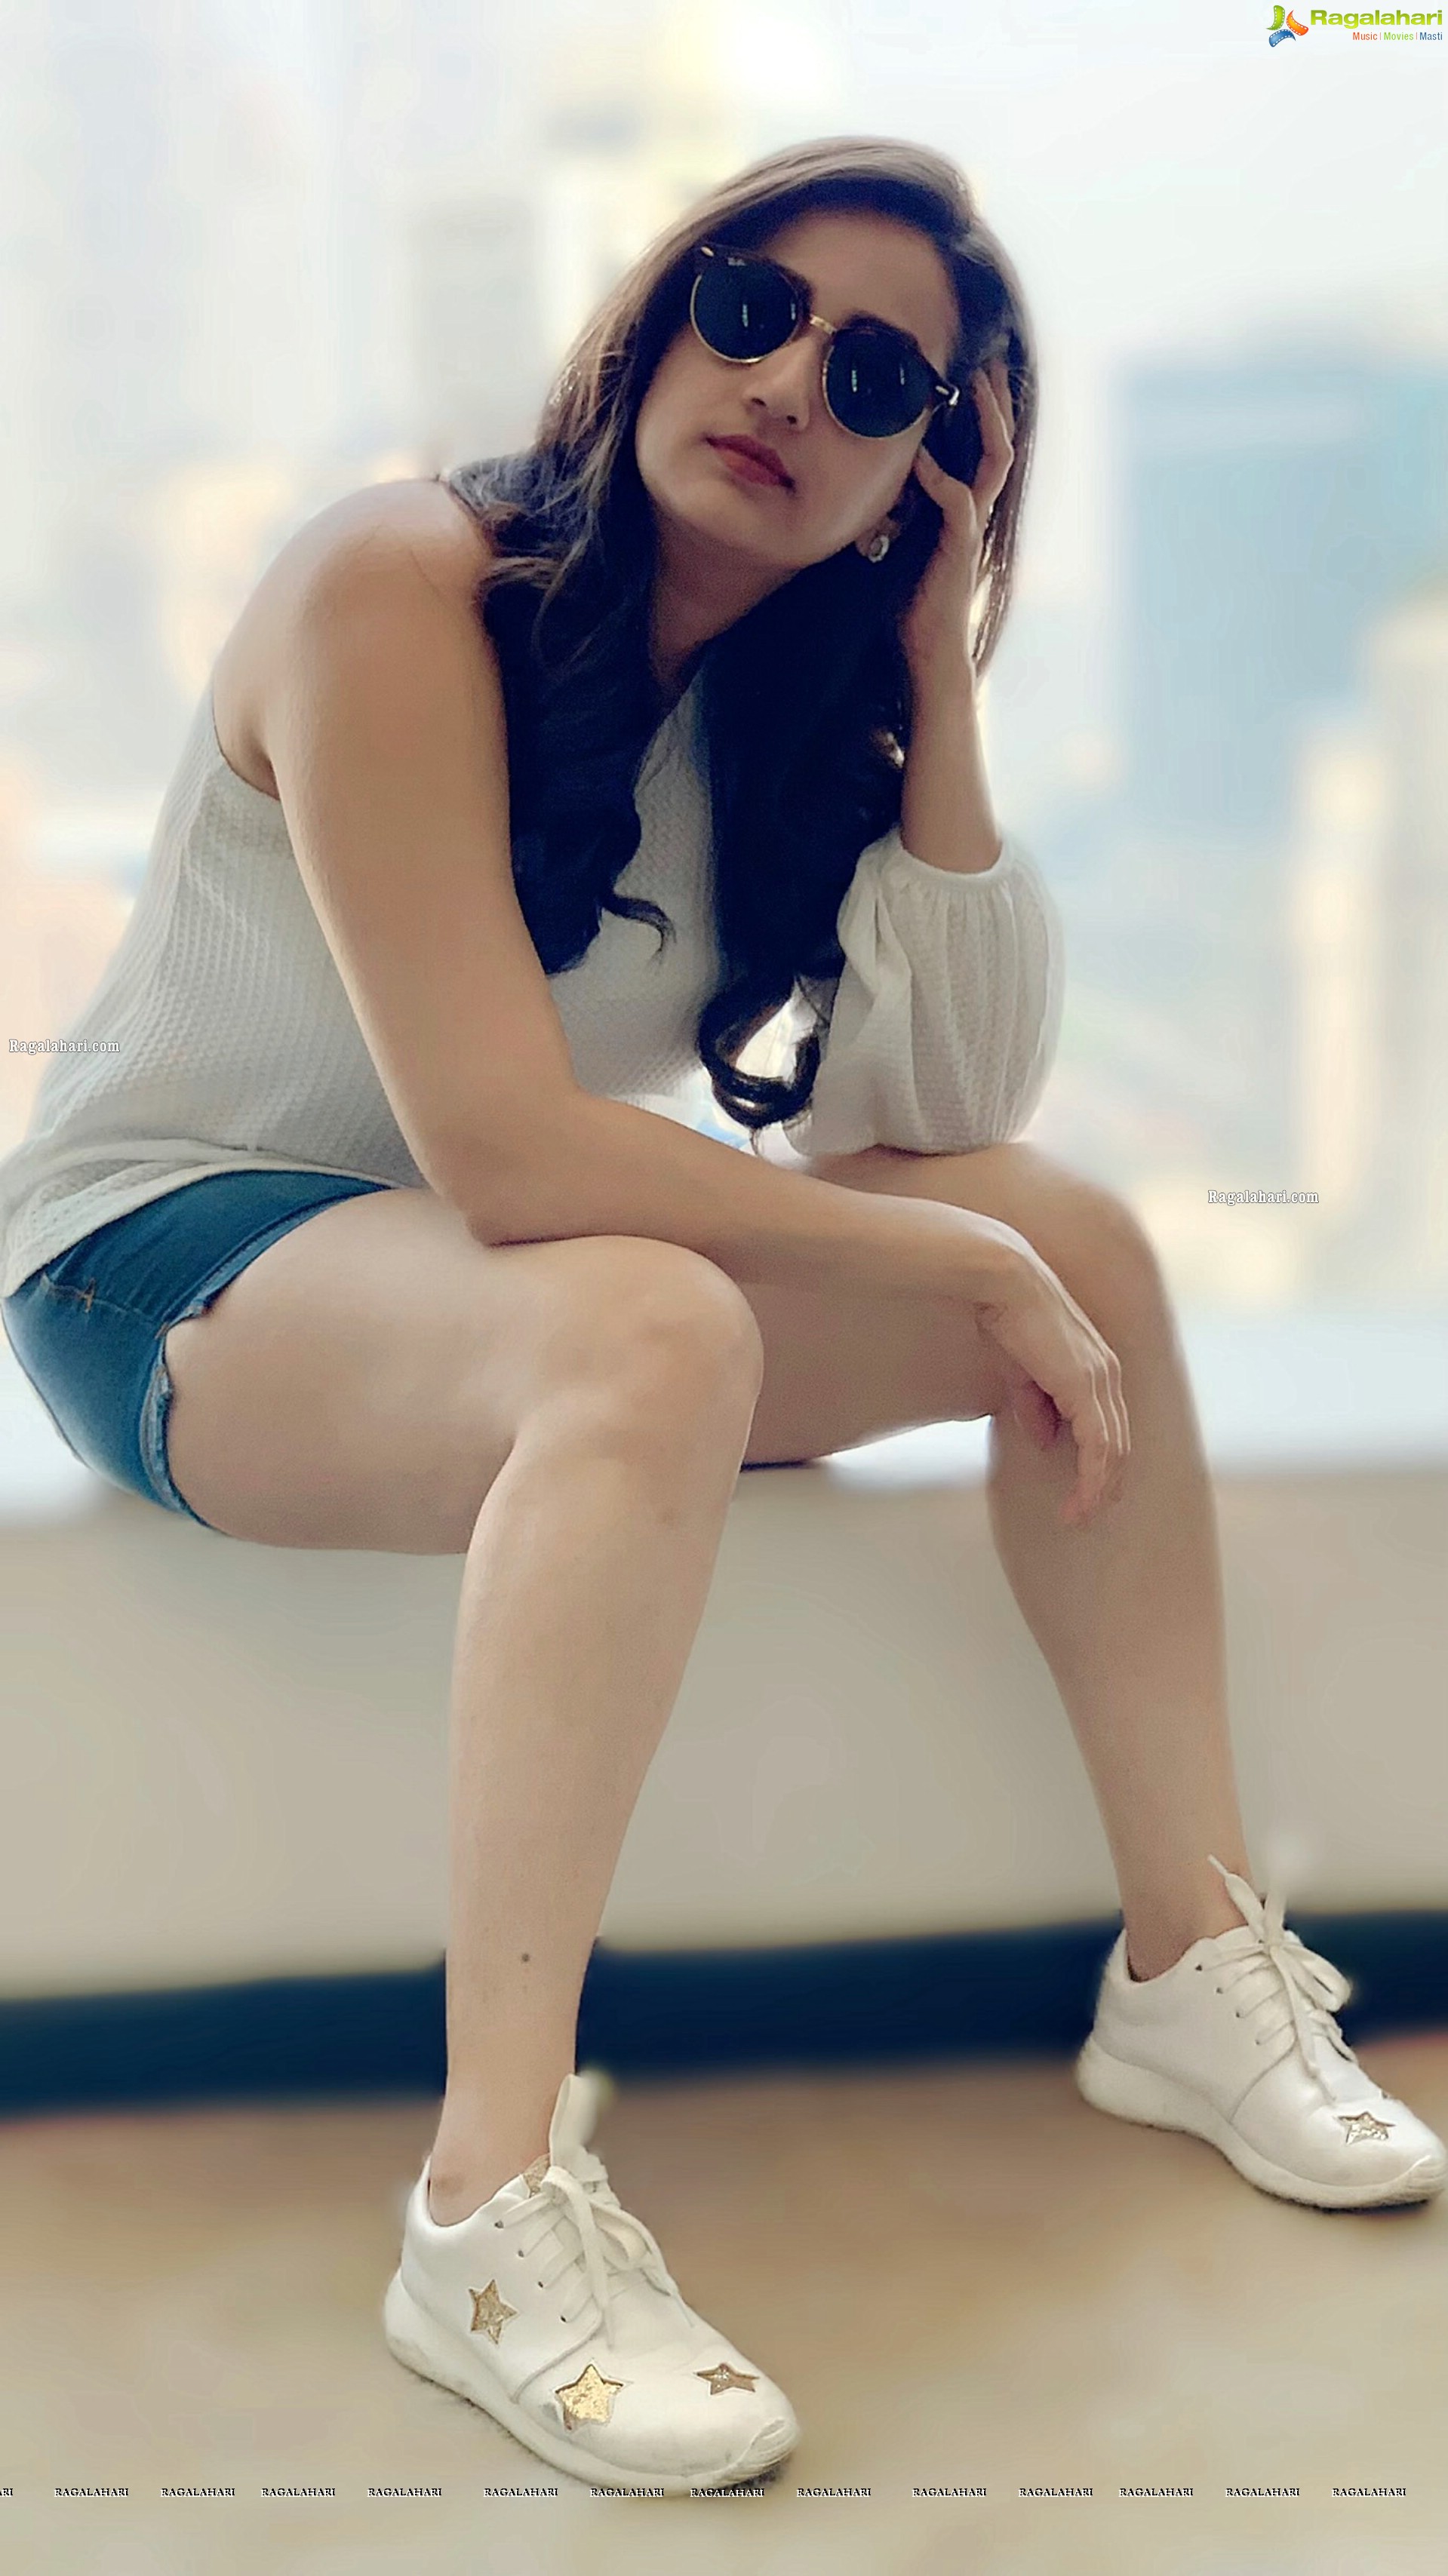 Manjusha in Denim Shorts and a White One Shoulder Top, HD Photo Gallery